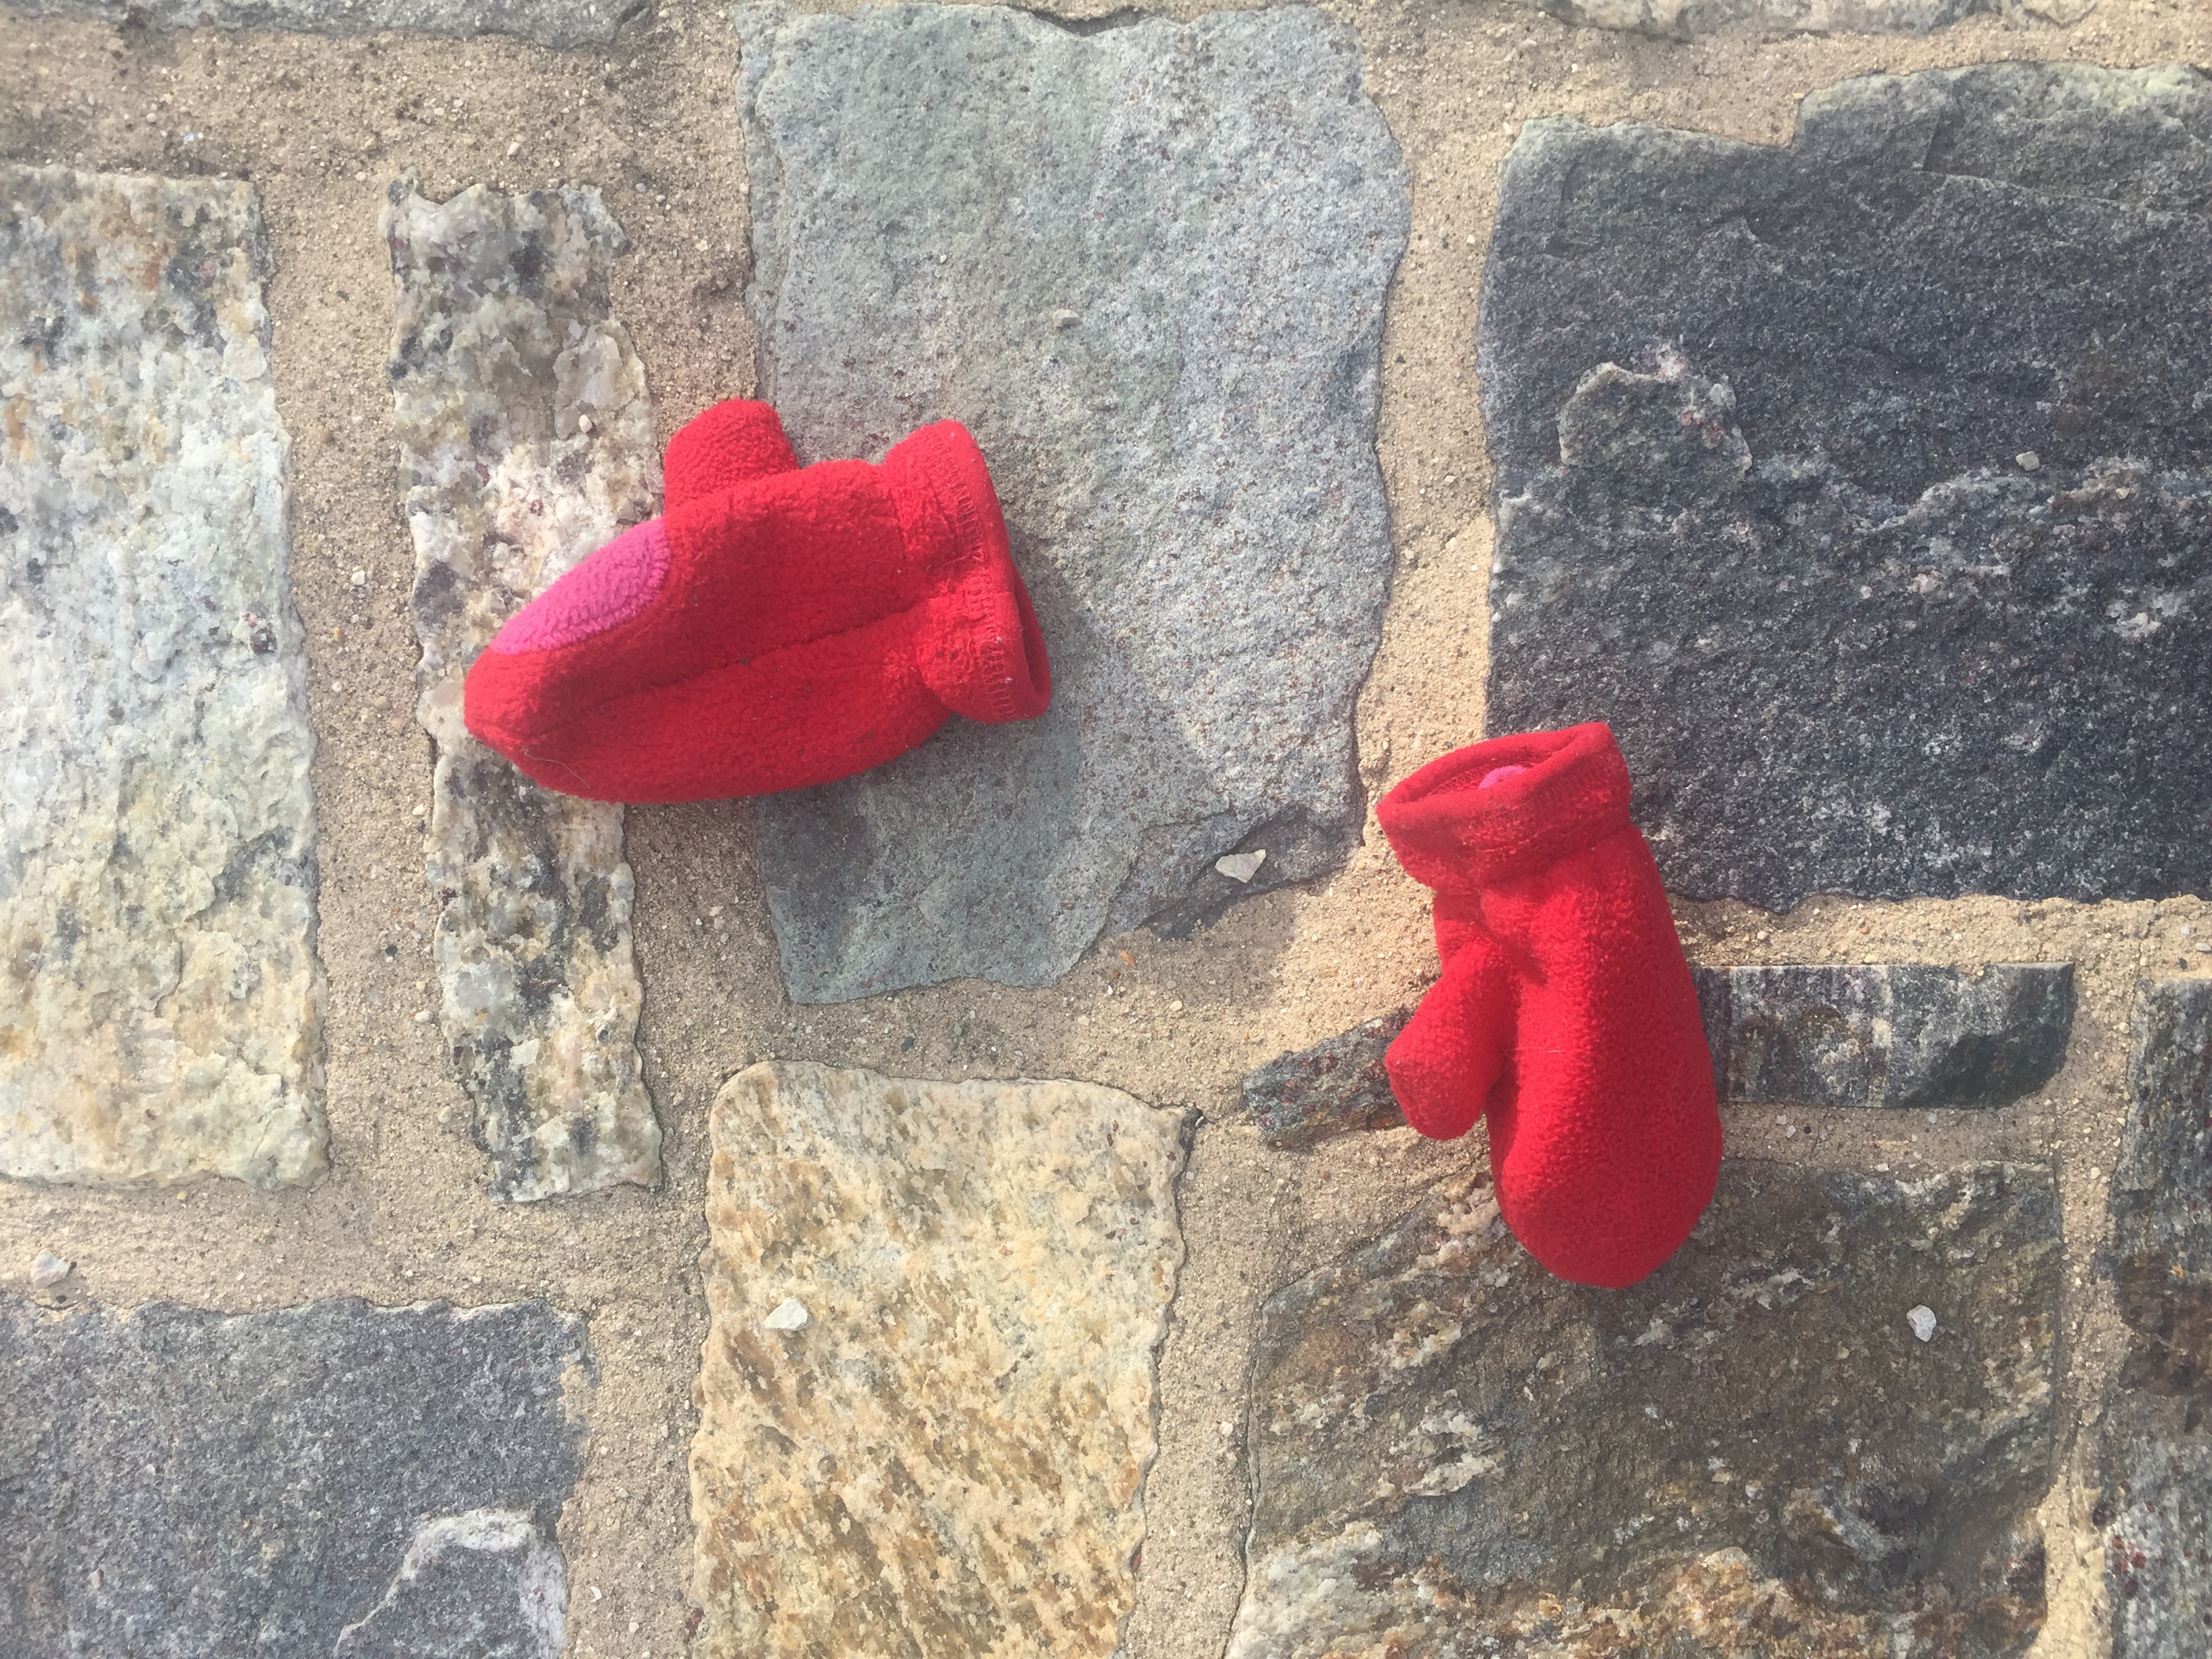 Gallery of Lost Gloves